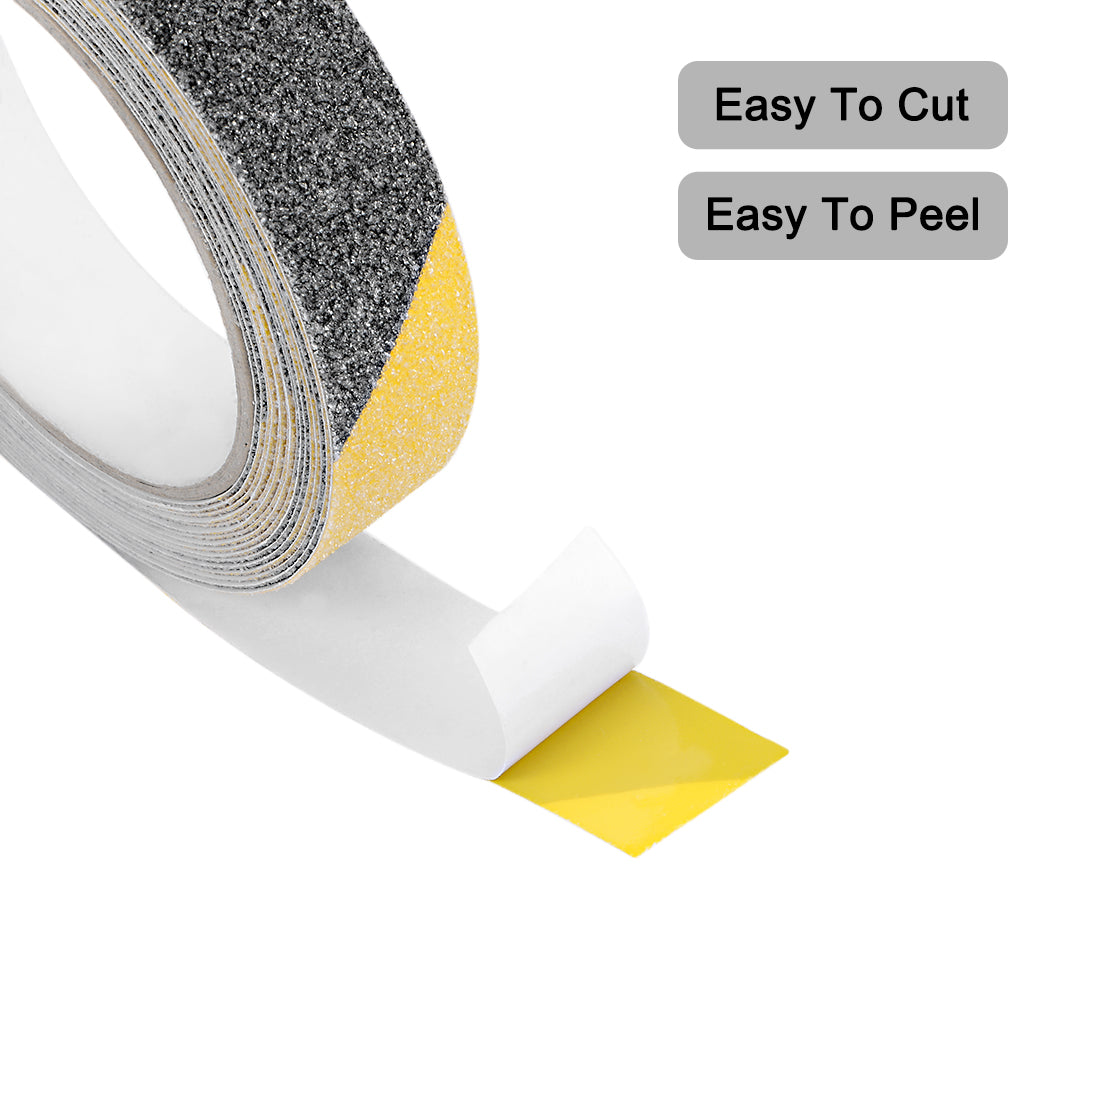 uxcell Uxcell Anti Slip Traction Grip Tape, 80 Grit Frosted Surface PVC Warning Tape Waterproof for Steps, 16 Ft x 1 Inch(LxW) Black Yellow